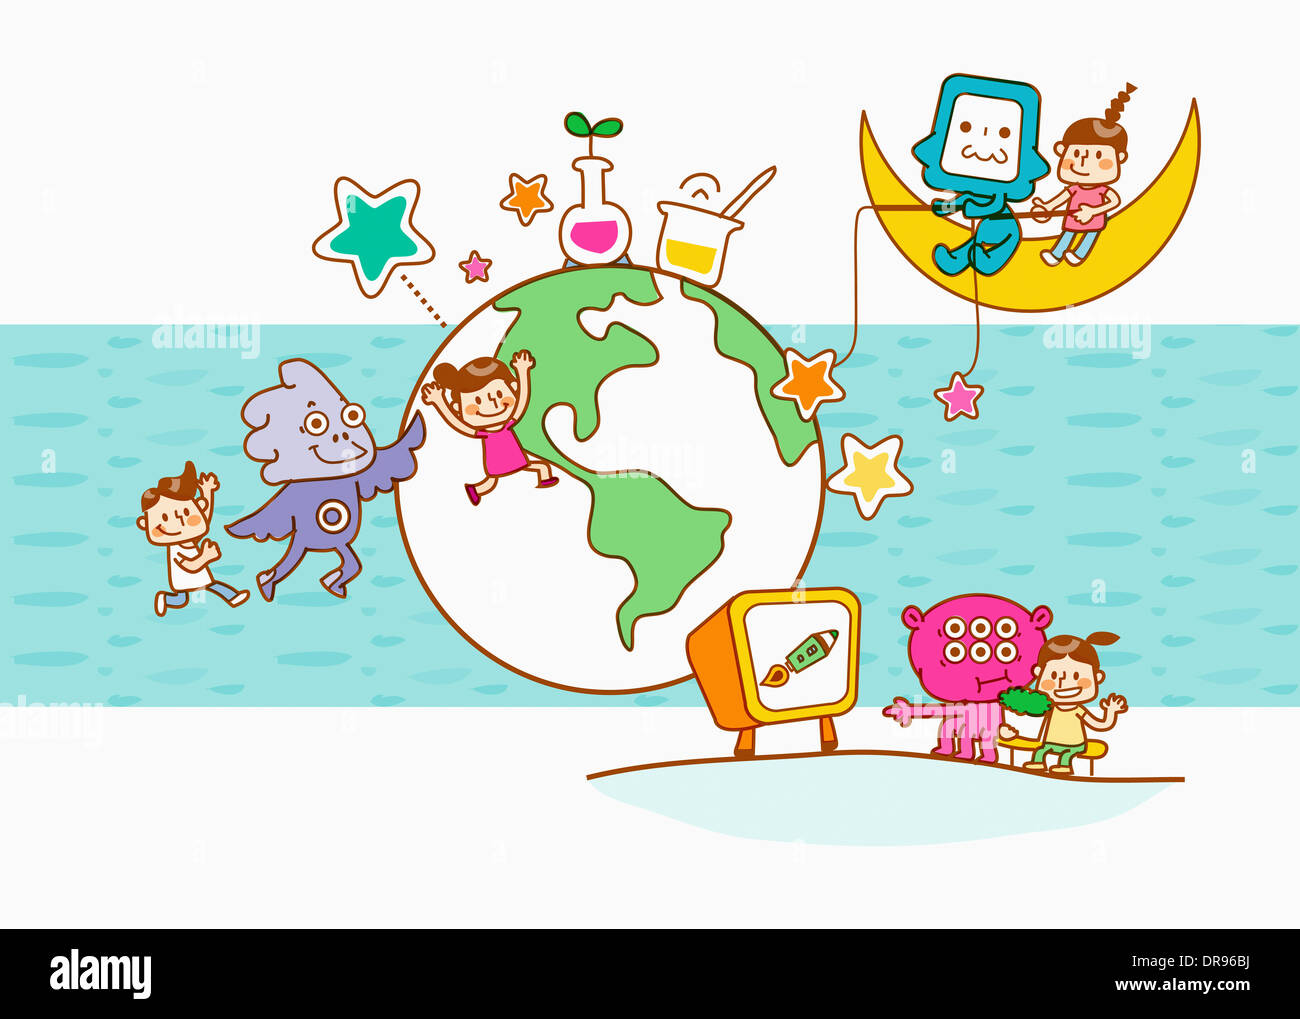 illustration of kids and robots Stock Photo